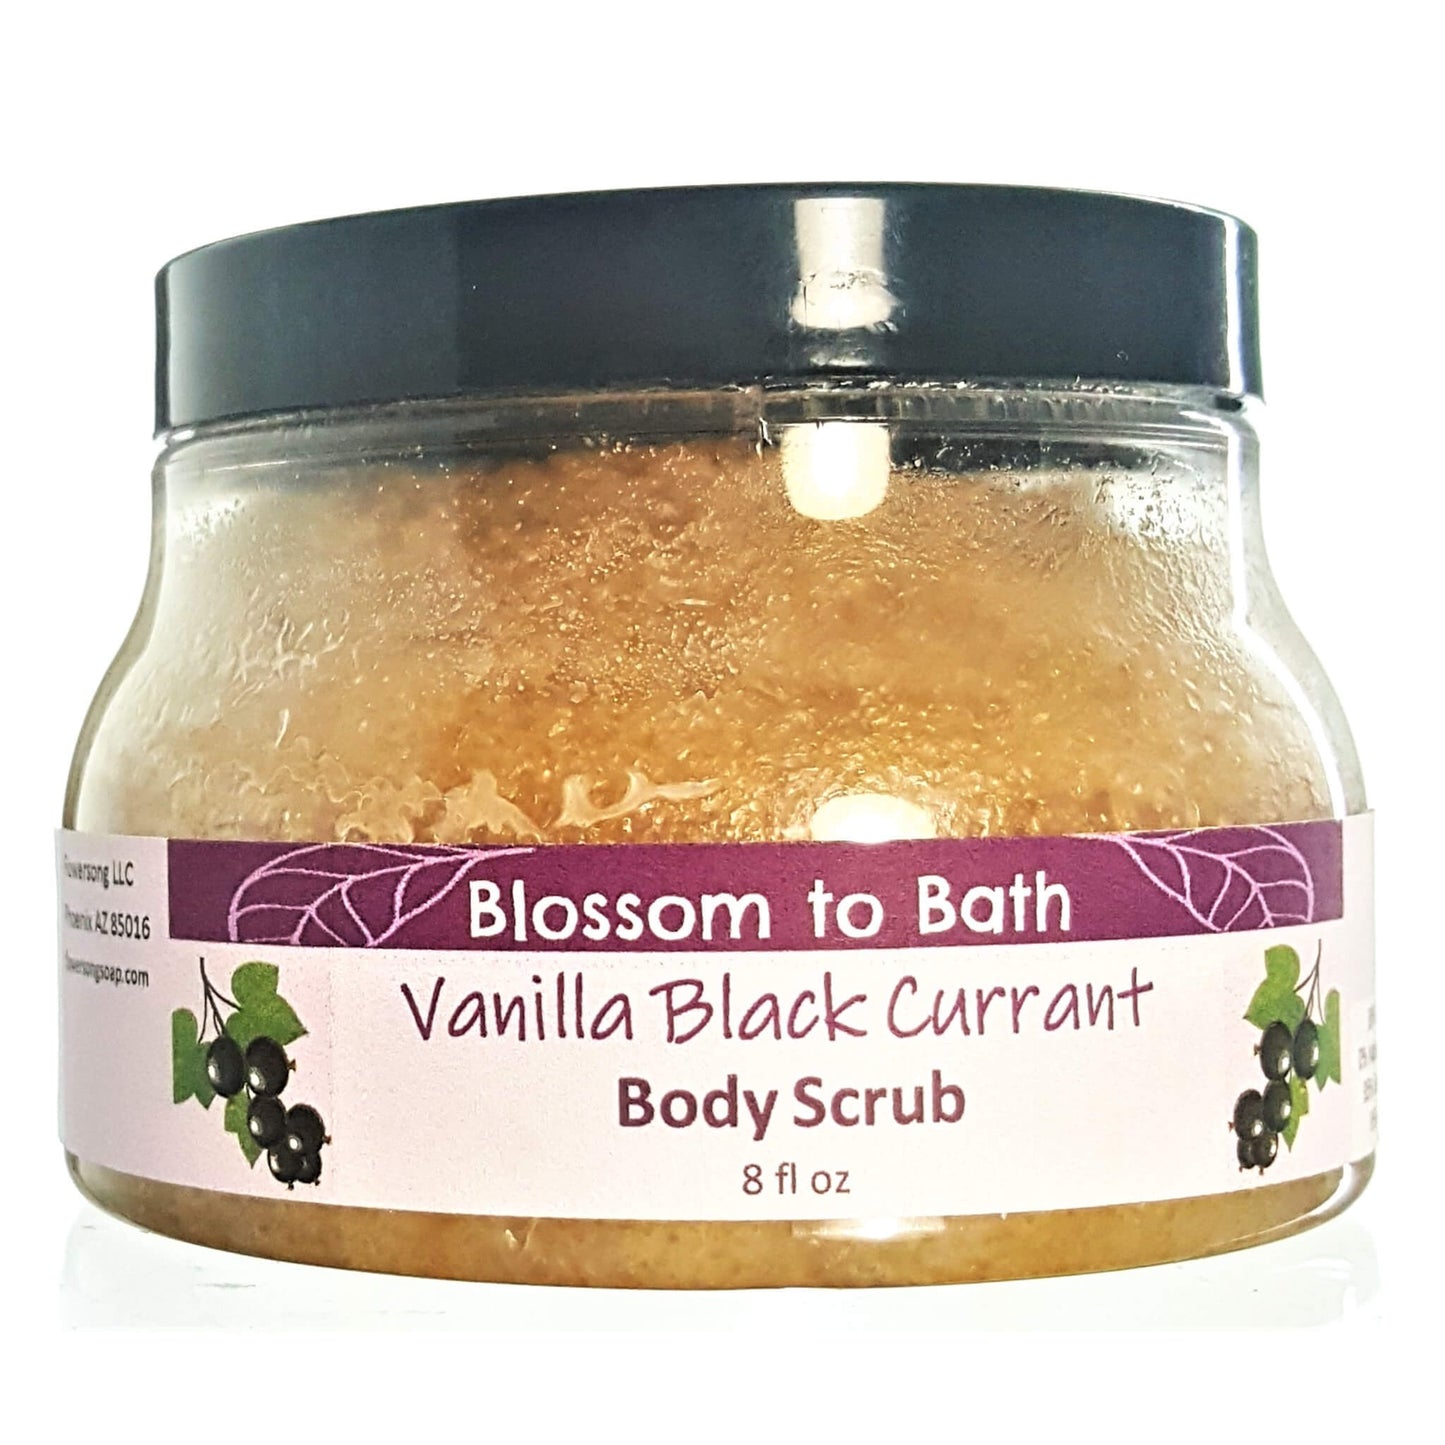 Buy Blossom to Bath Vanilla Black Currant Body Scrub from Flowersong Soap Studio.  Large crystal turbinado sugar plus luxury rich oils conveniently exfoliate and moisturize in one step  A sensuous rich berry scent with a hint of vanilla and a twist of freshness.